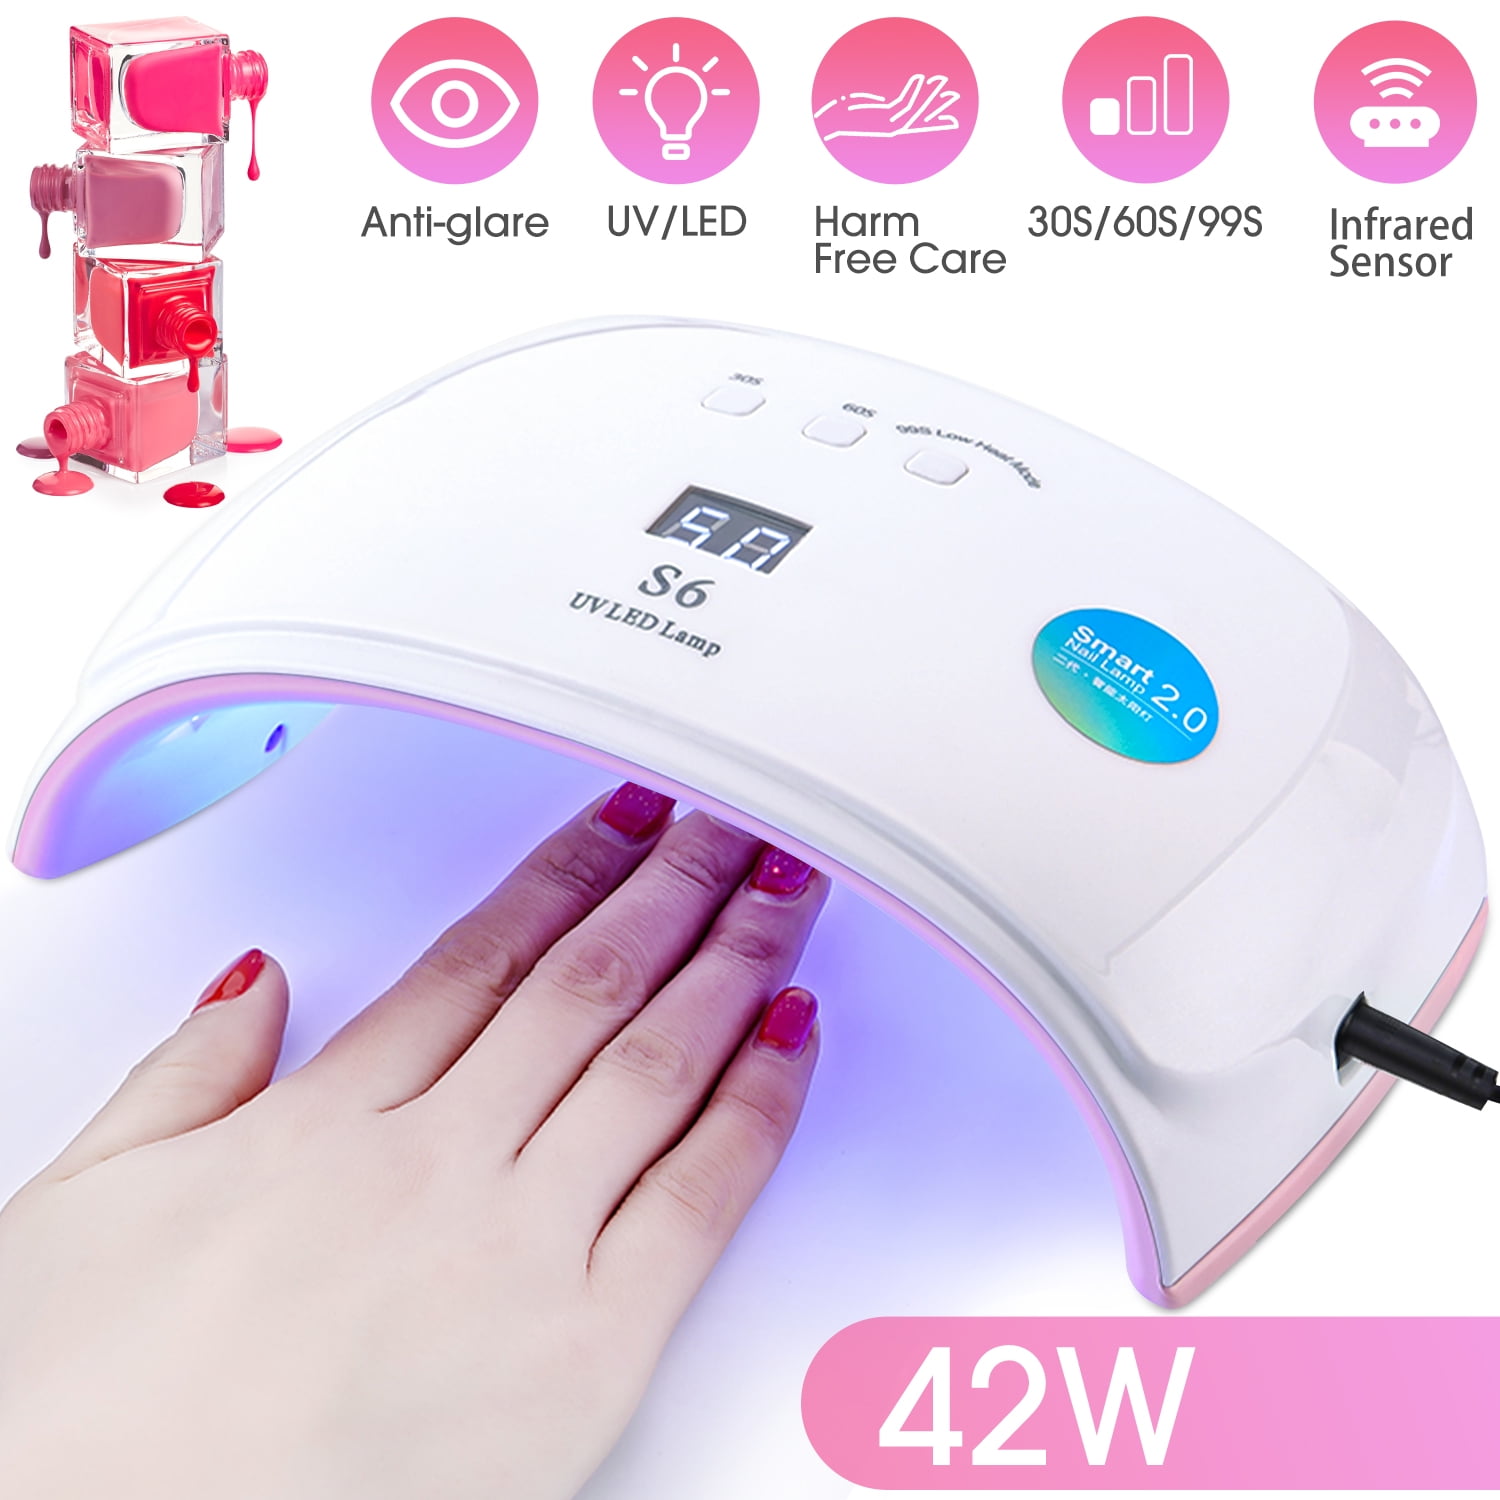 UV LED Nail Lamp, 42W Nail Dryer Gel Nail Light for Nail Polish, Light  Curing in 3 Modes for Time, for Manicure Pedicure Nail Art at Home -  